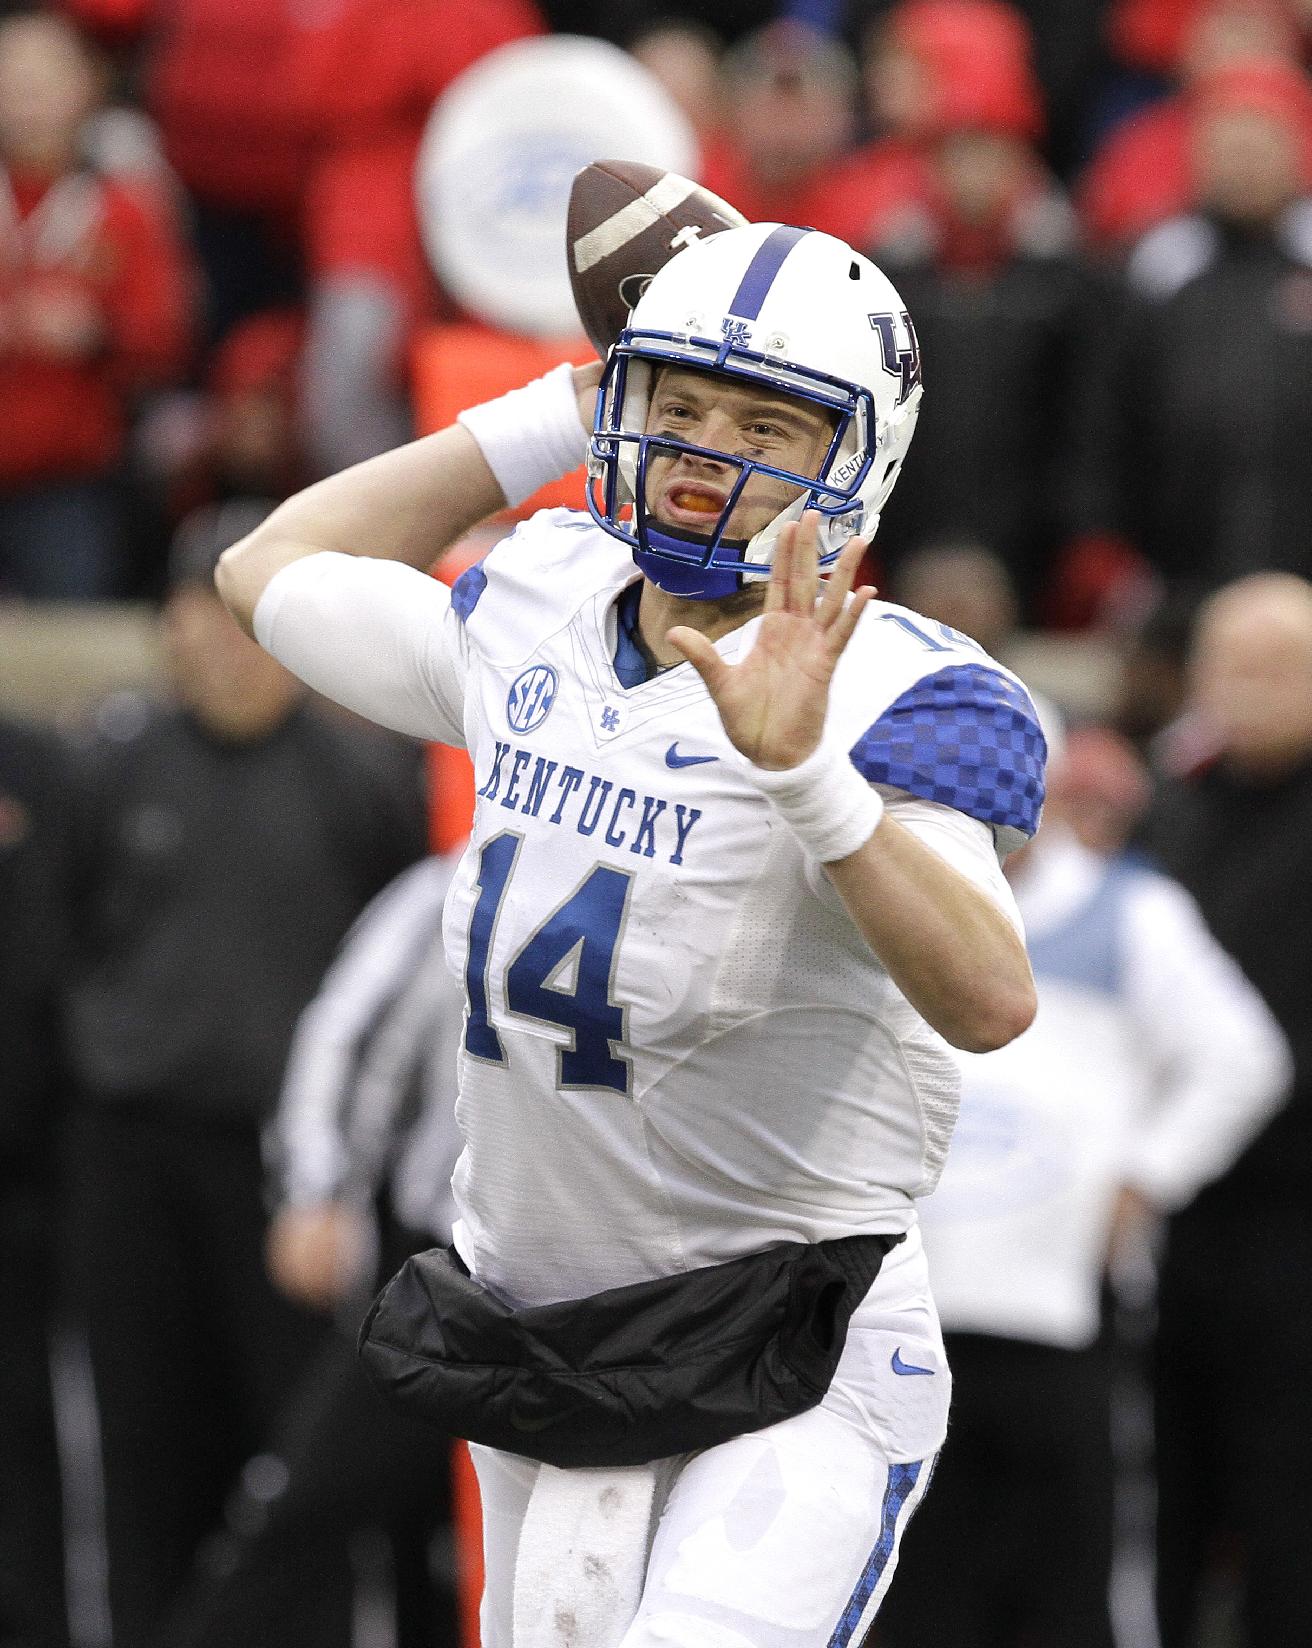 Kentucky quarterback Patrick Towles attempts a pass during the second half of an NCAA college football game against Louisville, Saturday, Nov. 29, 2014, in Louisville, Ky. Louisville defeated Kentucky 44-40. (AP Photo/Garry Jones)